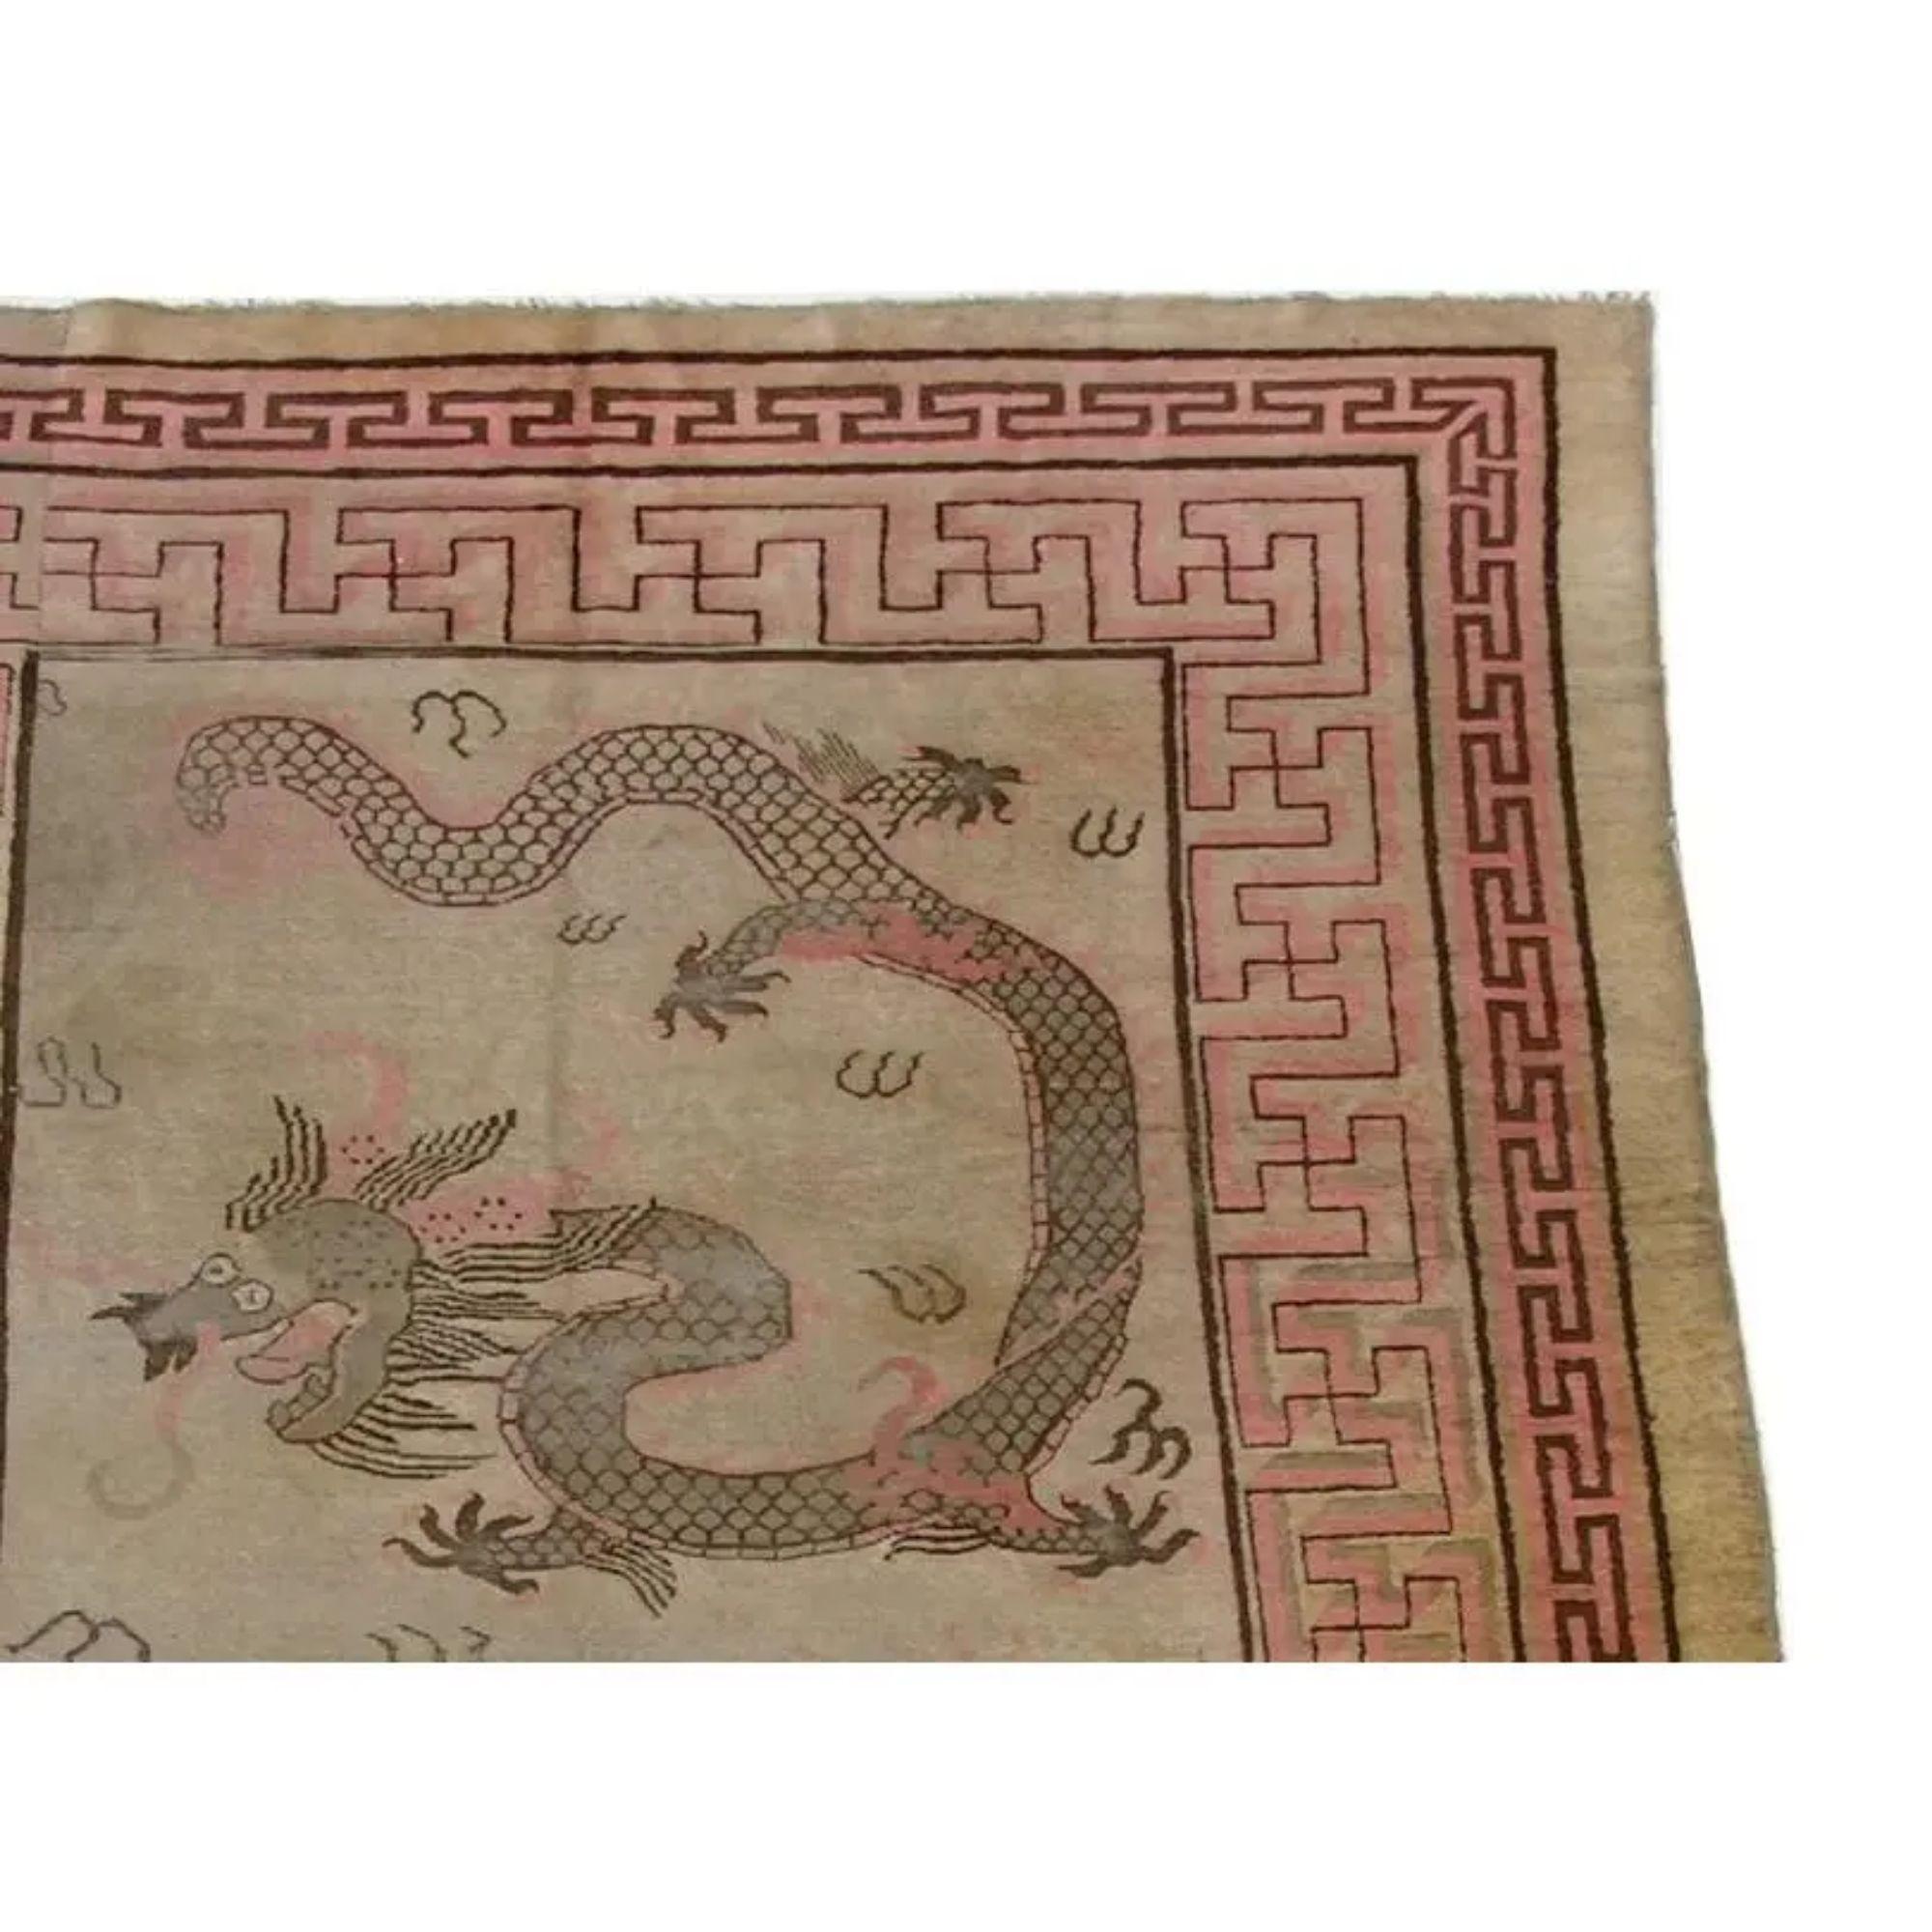 Early 19th Century Antique Dragon Design Chinese Rug 11'9'' X 7'3'', Handmade and Hand-knotted with dragon design
Y & B B